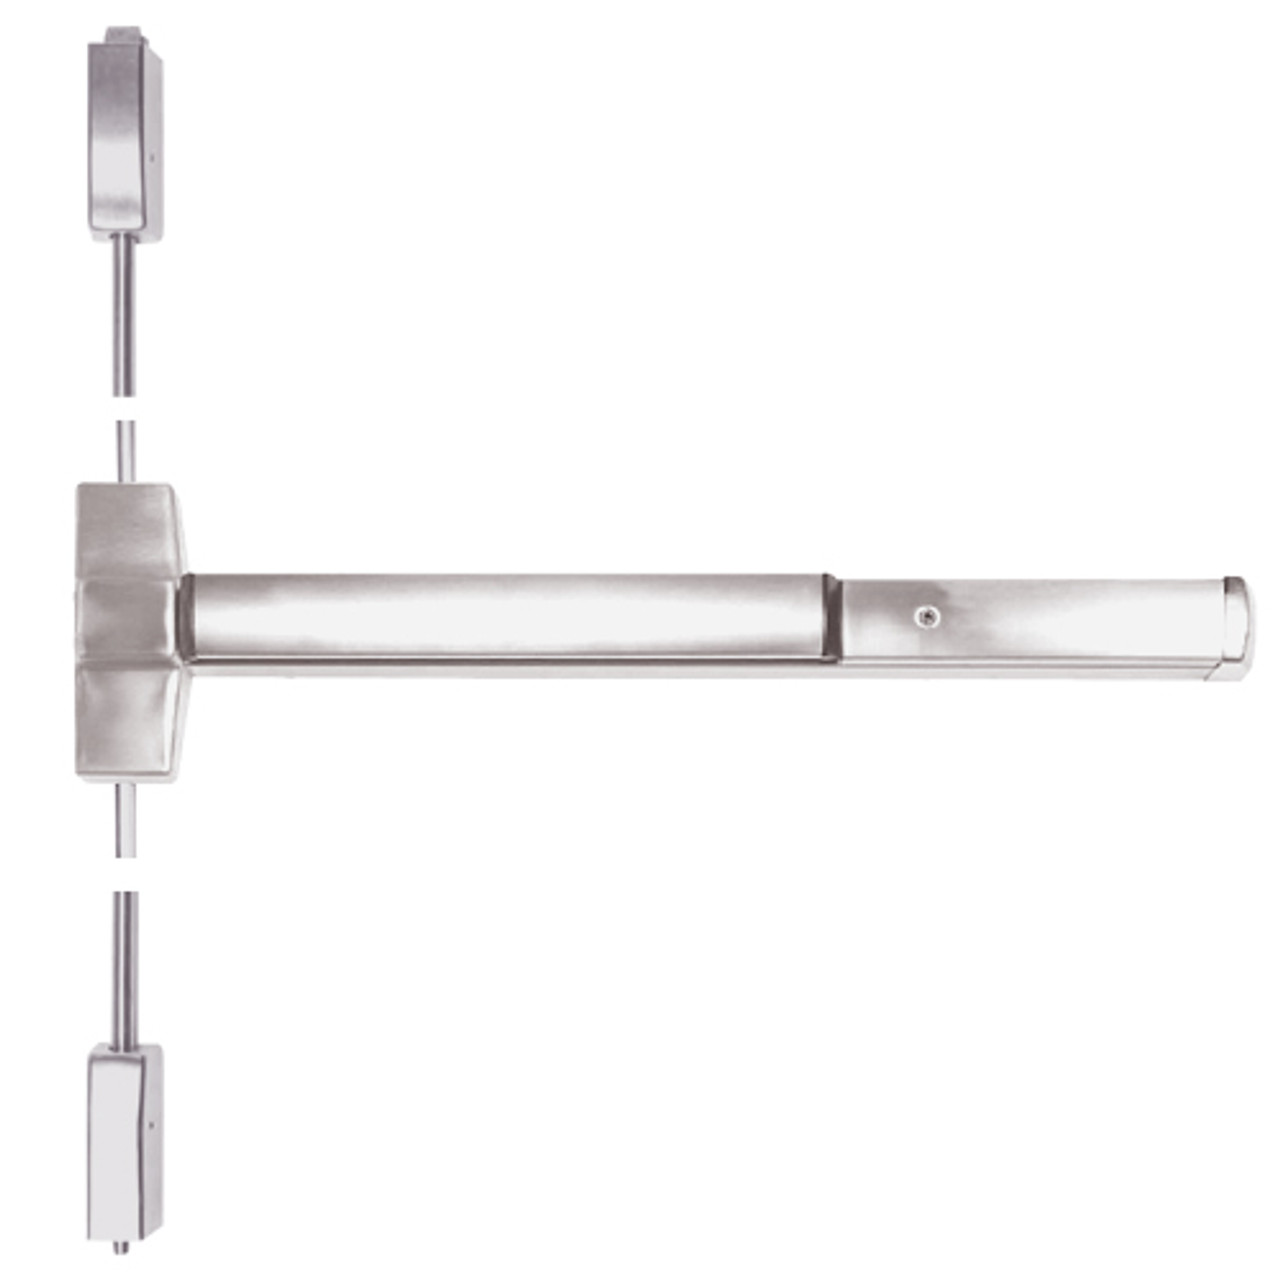 ED5470-630 Corbin ED5400 Series Non Fire Rated Vertical Rod Exit Device in Satin Stainless Steel Finish